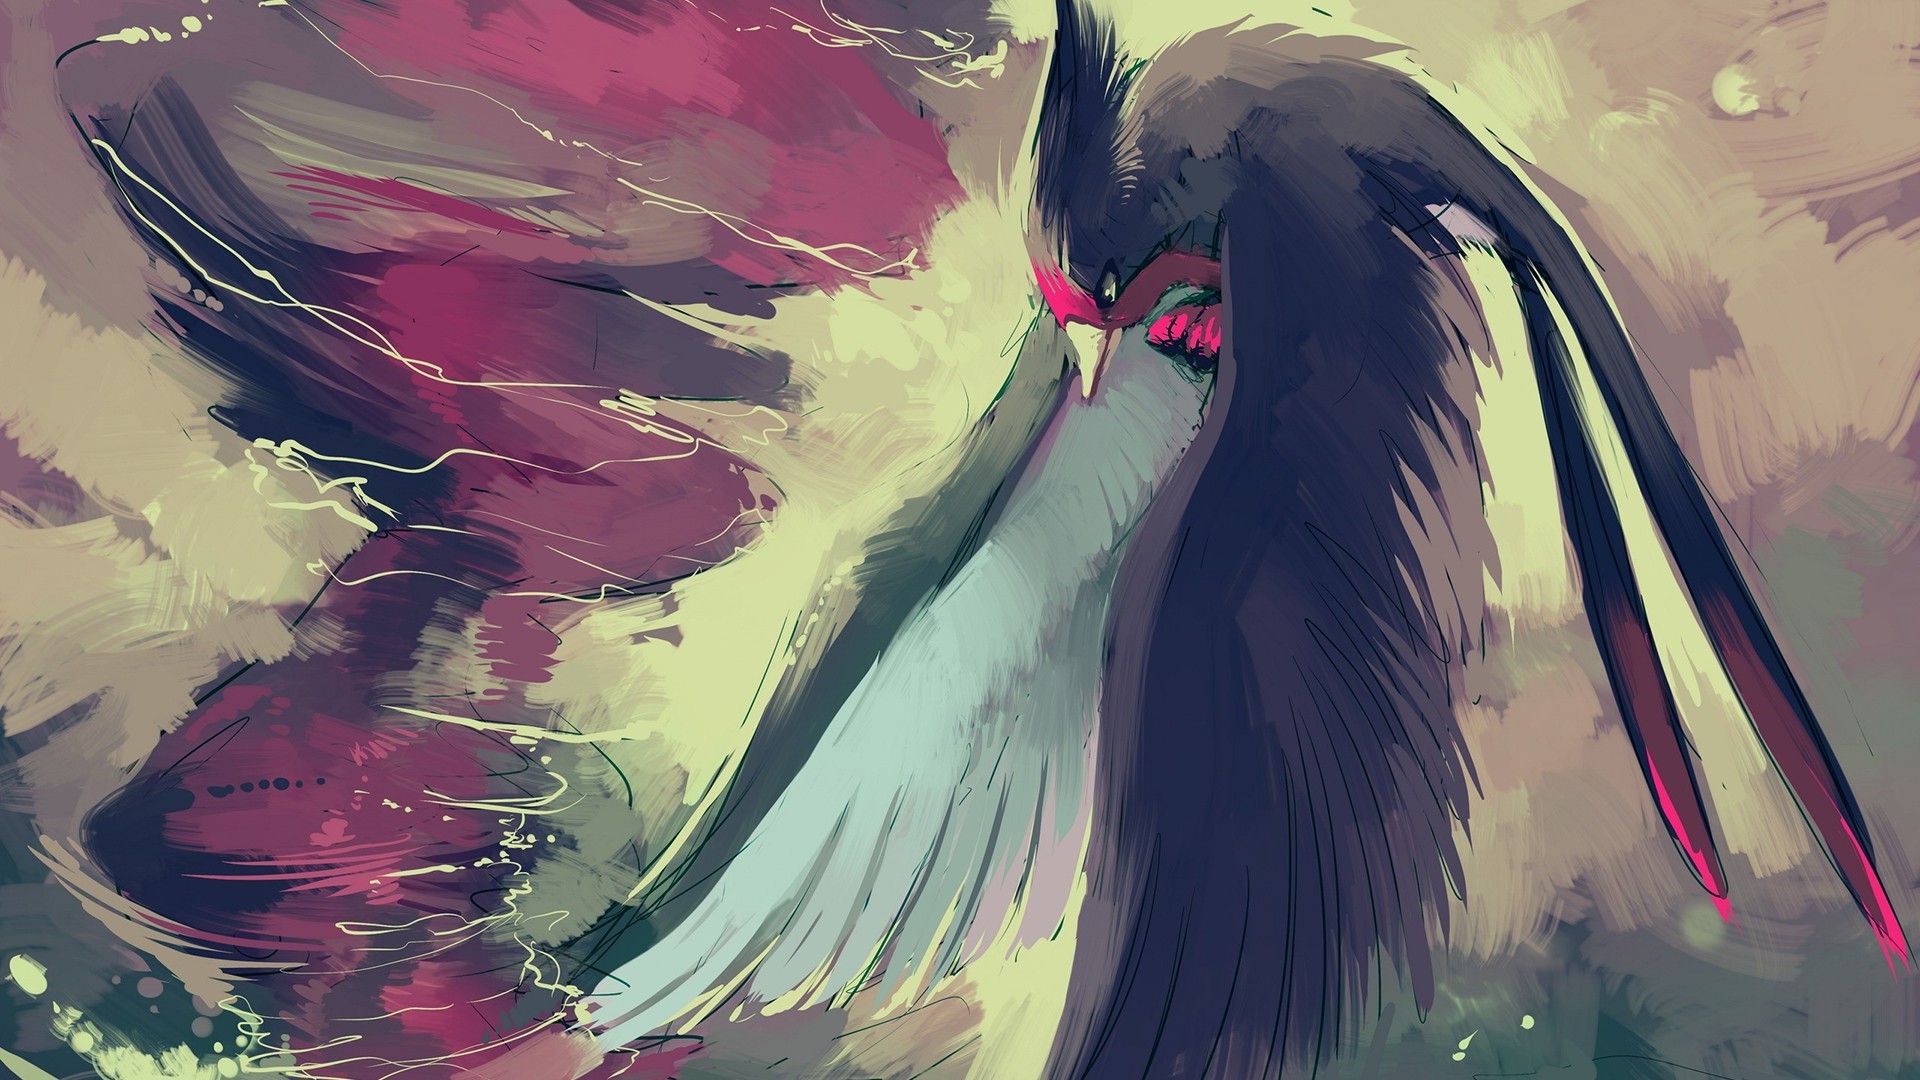 Wallpaper, drawing, illustration, birds, anime, Swellow, pokemon, wing, sketch, 1920x1080 px, fictional character 1920x1080